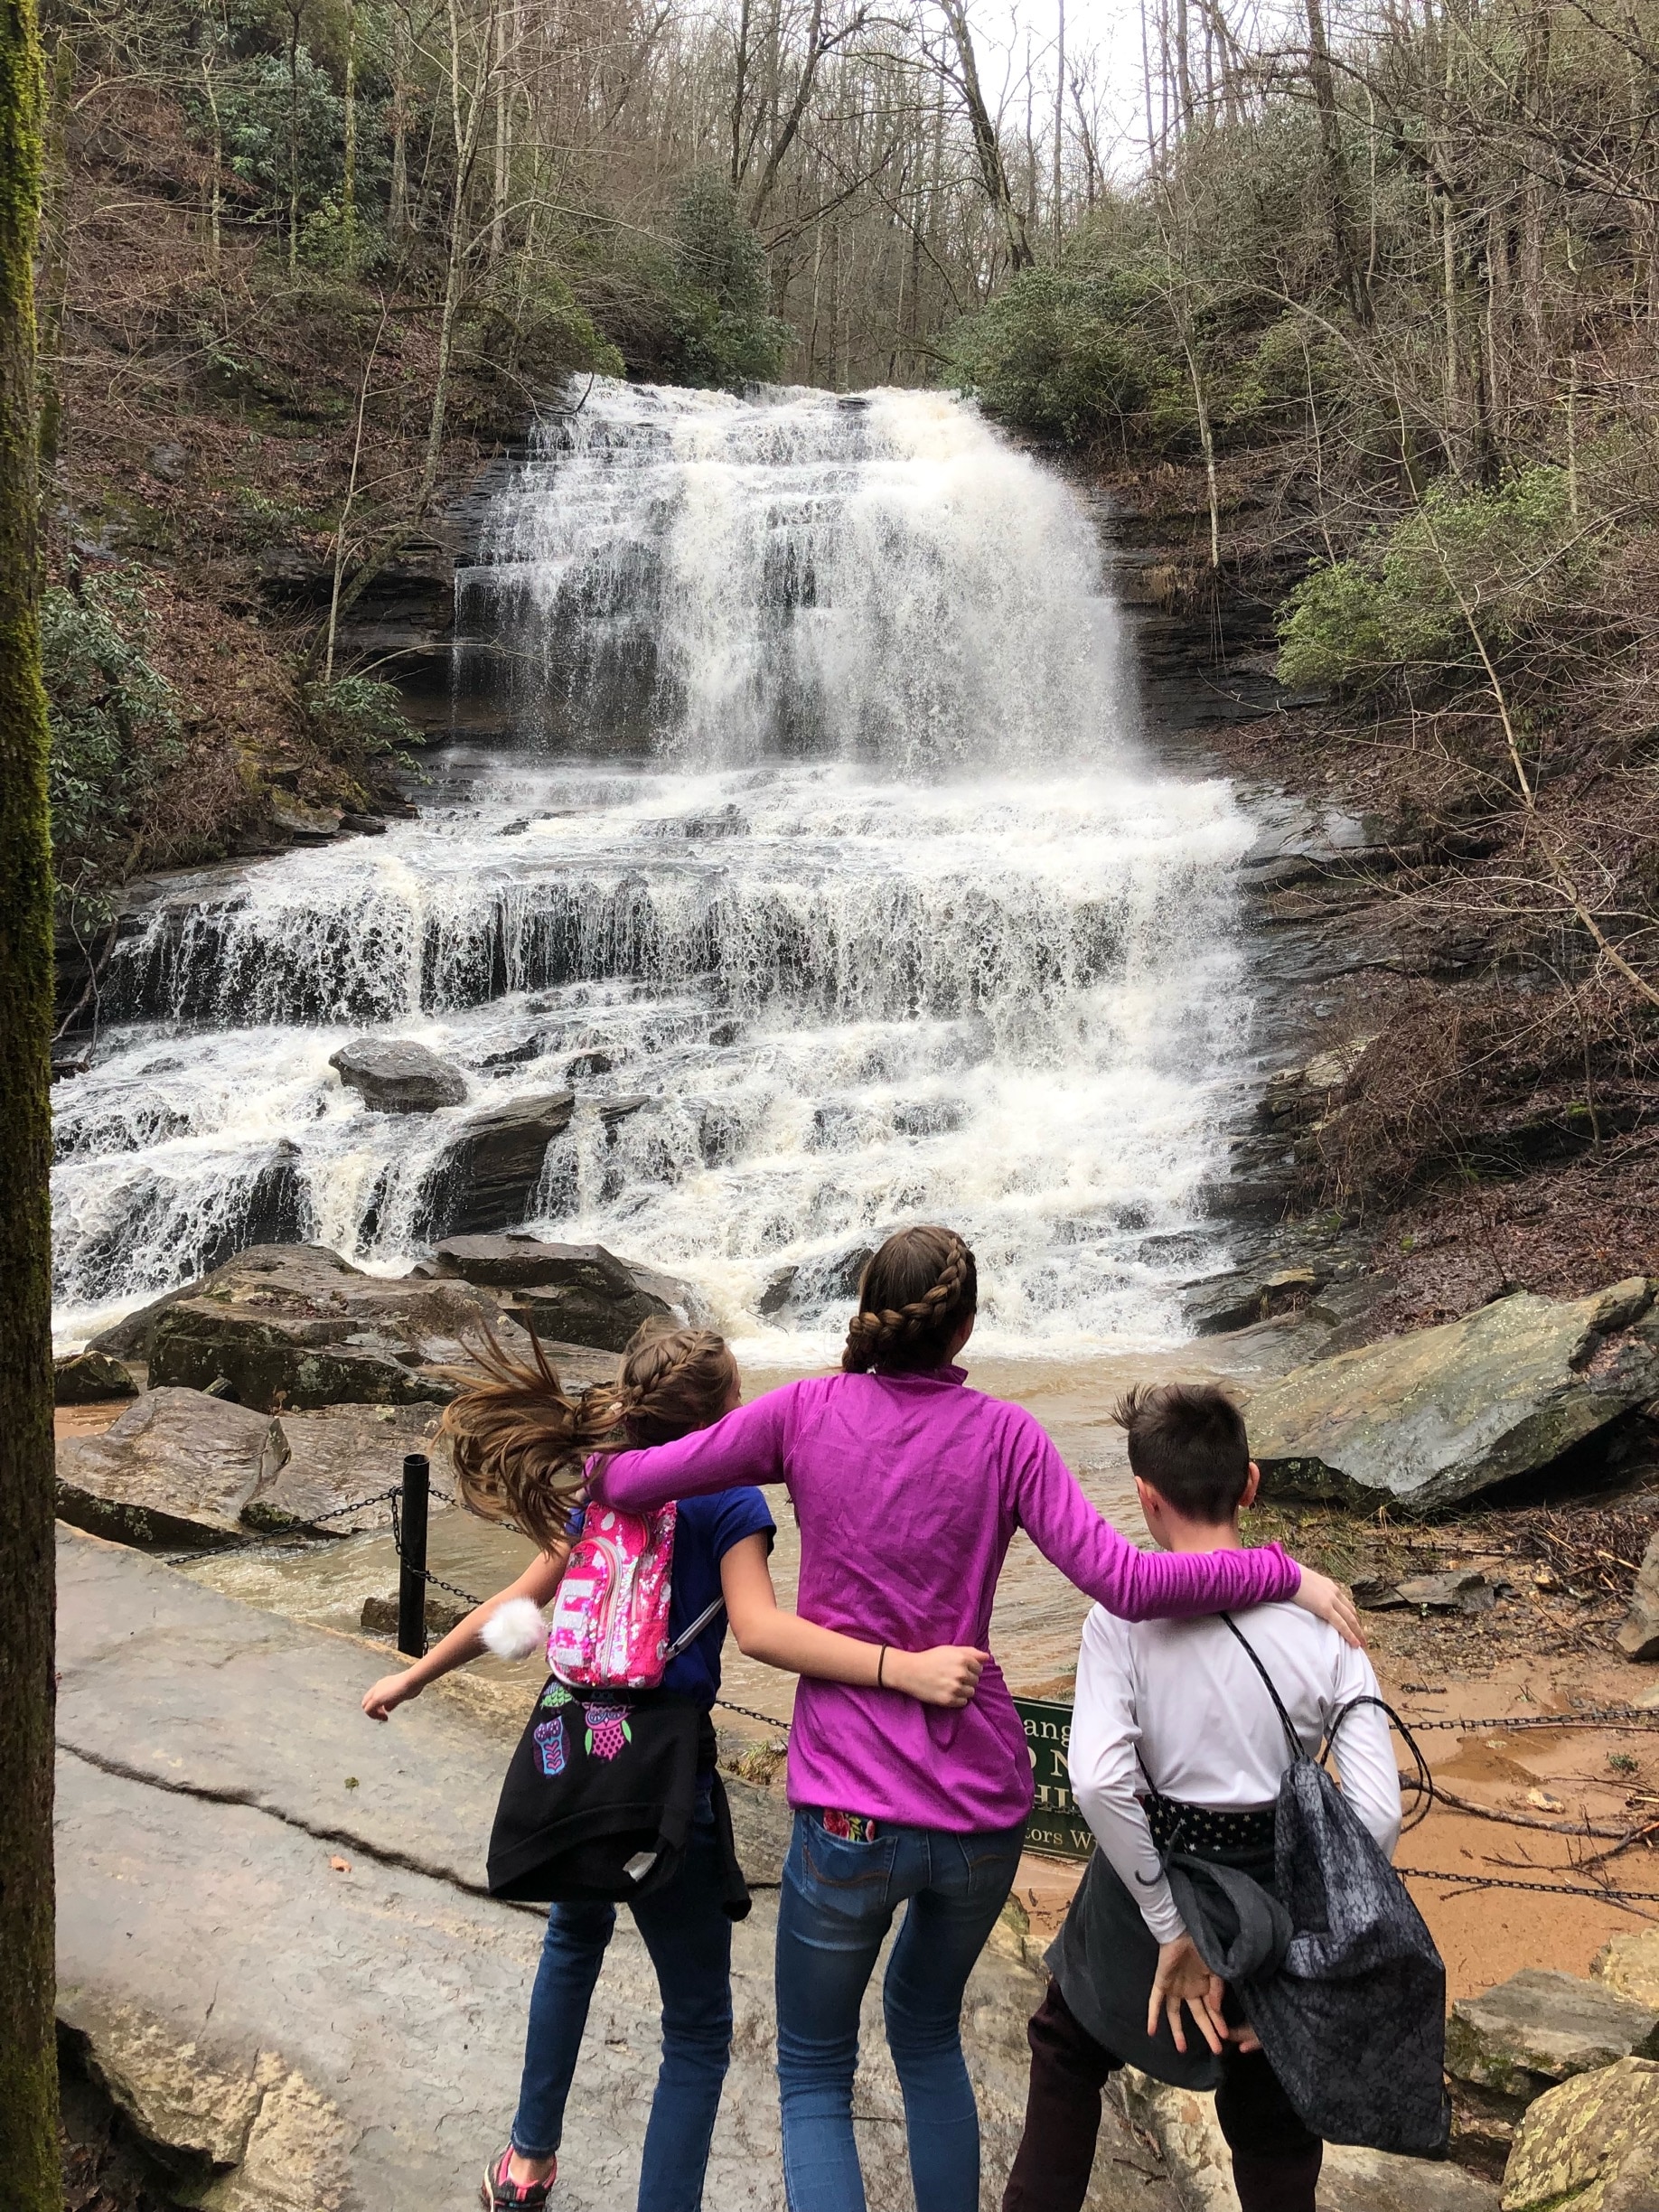 

Visit Frugal Family Travelers blog to learn more about this great location, to receive the travel itinerary and to discover more great places like this:

North Carolina Waterfalls - Pearsons Falls

http://frugalfamilytravelers.blogspot.com/2018/02/8-tranquil-spots-not-to-miss-in-north.html

Follow us on:

Facebook: https://www.facebook.com/frugalfamilytravelers

Twitter: @FrugalFamTrav
